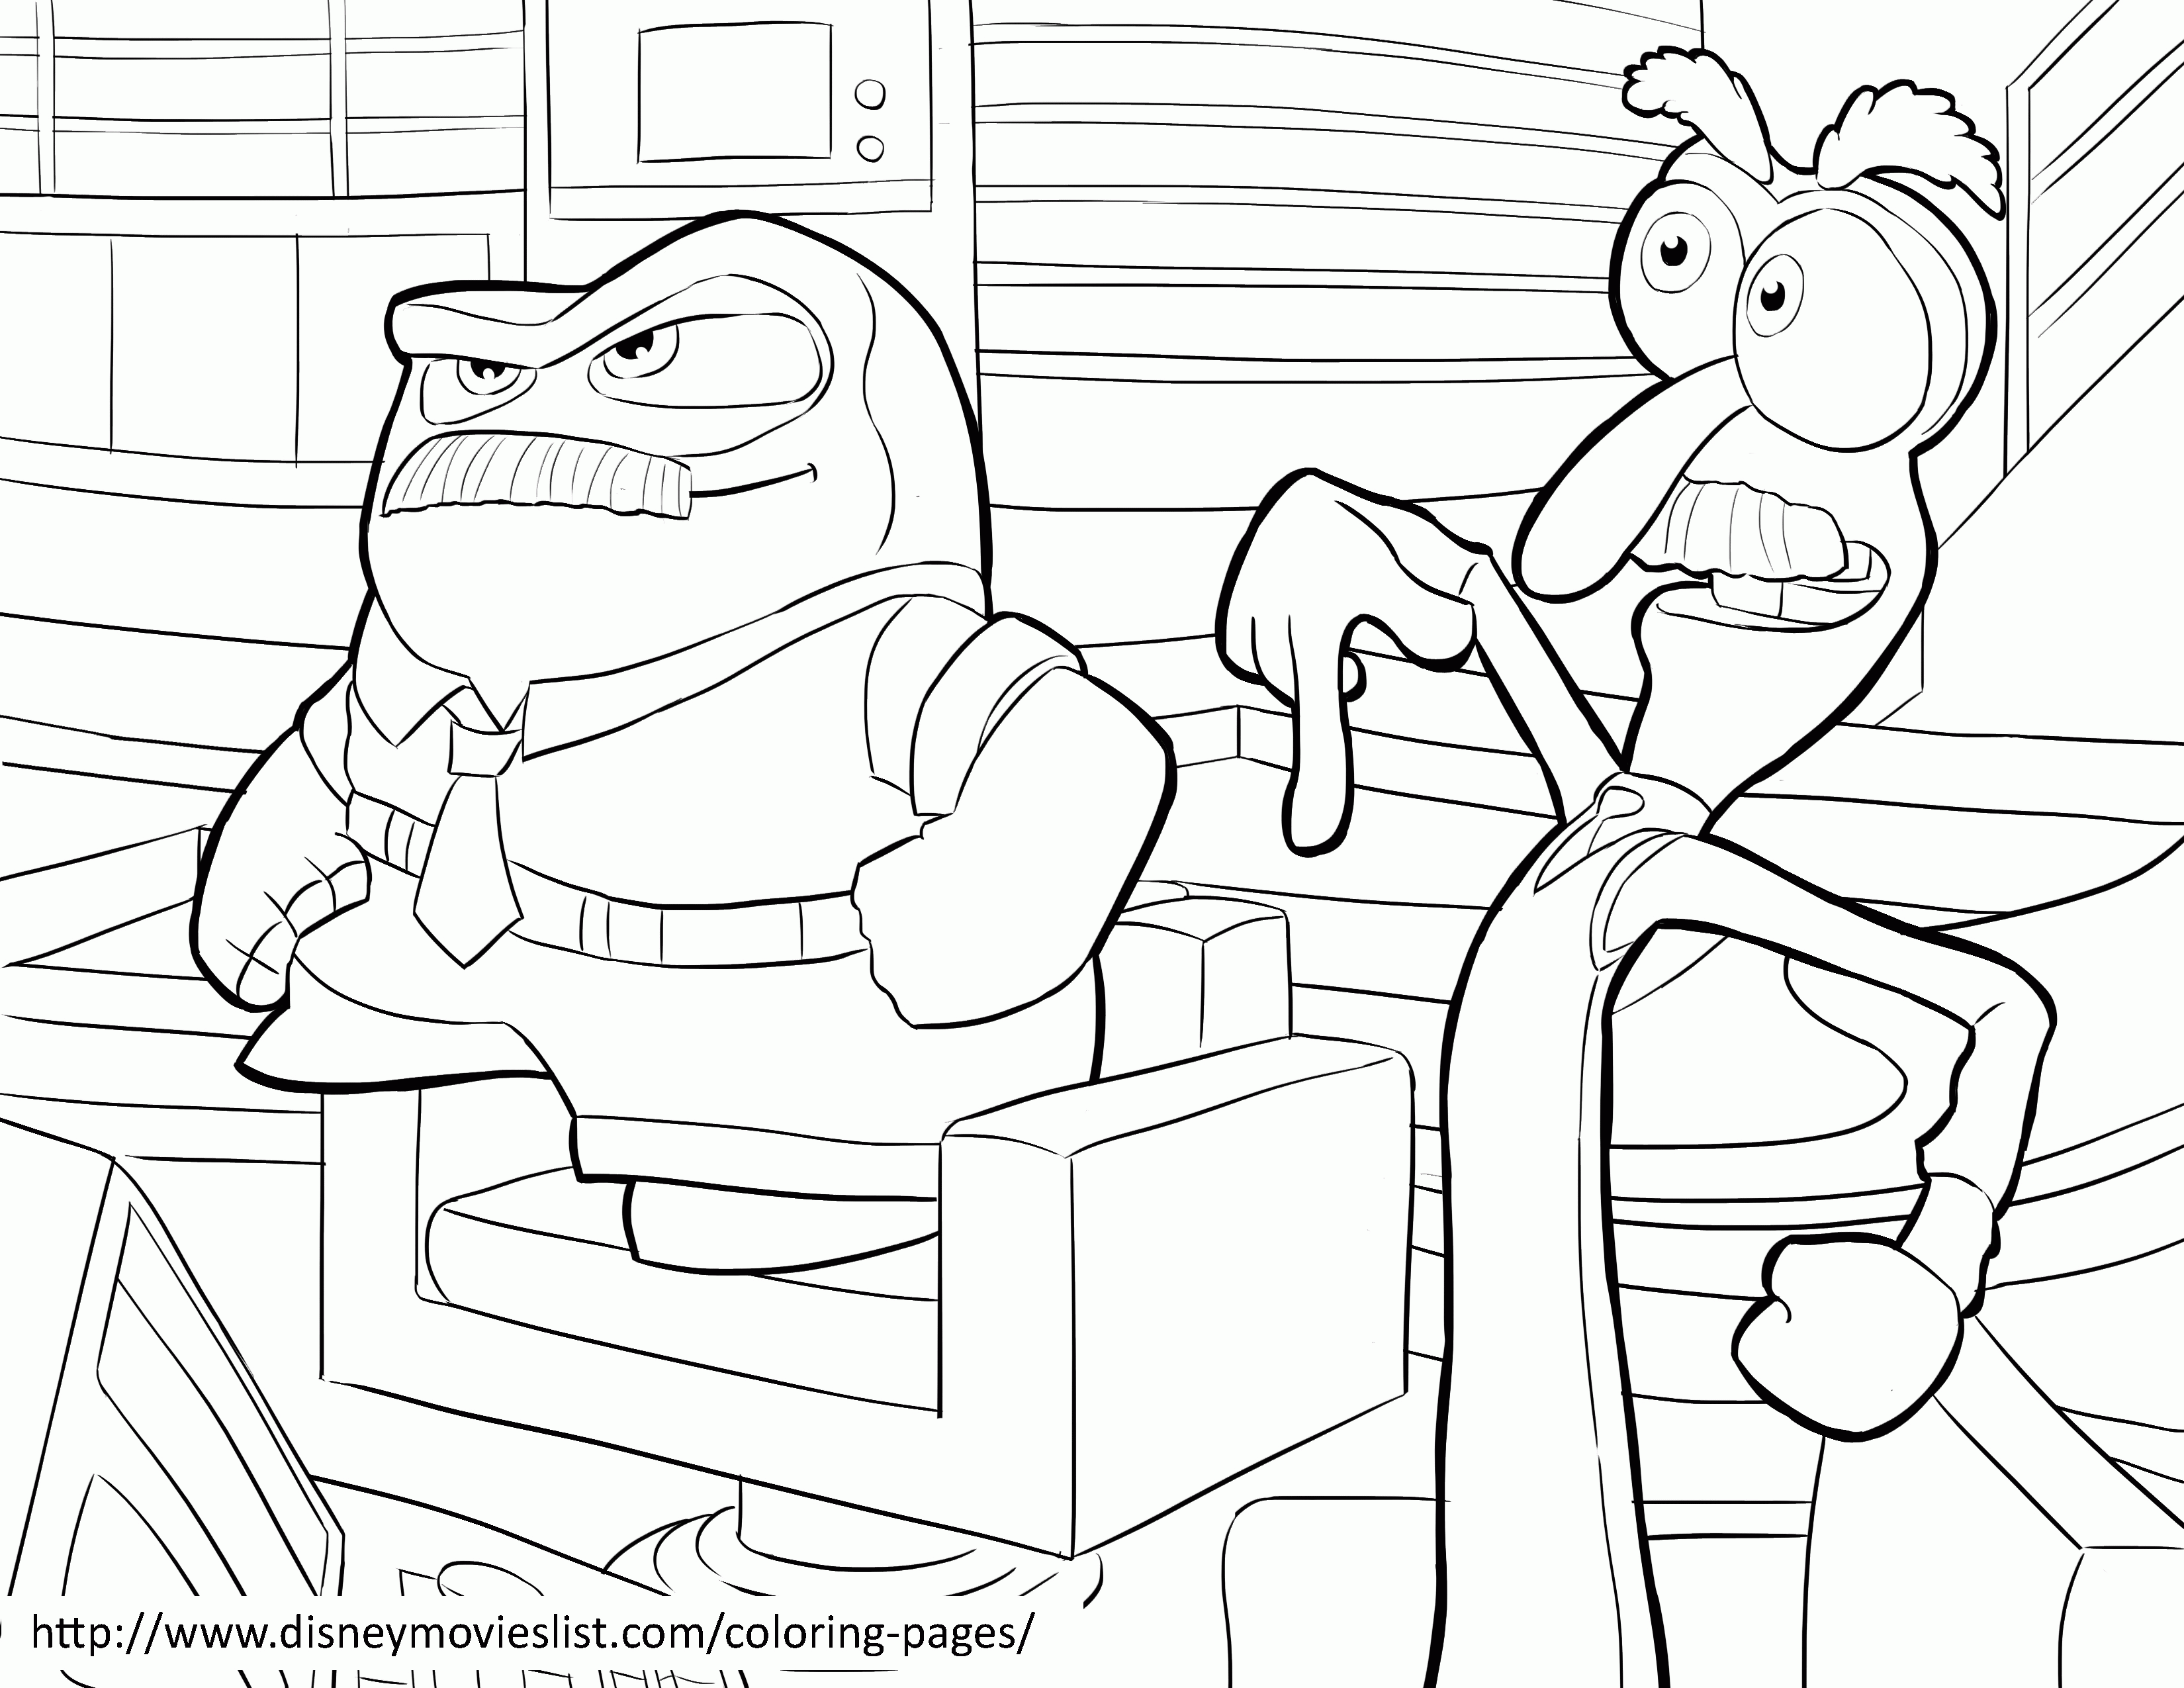 Anger and Fear - Disney's Inside Out Coloring Page